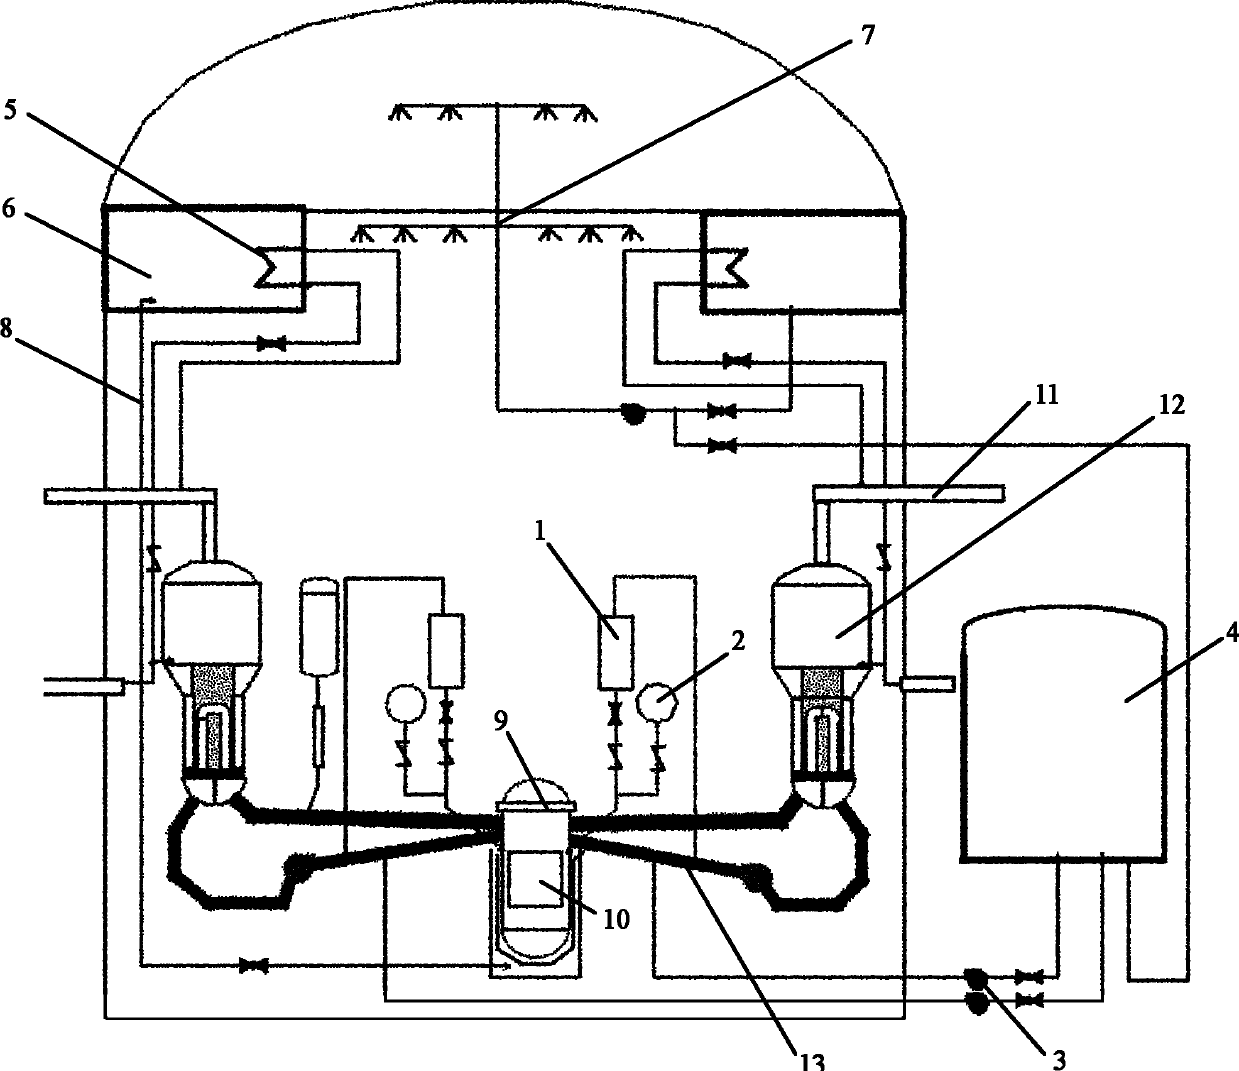 Passive and active combined special safety system for nuclear power plant